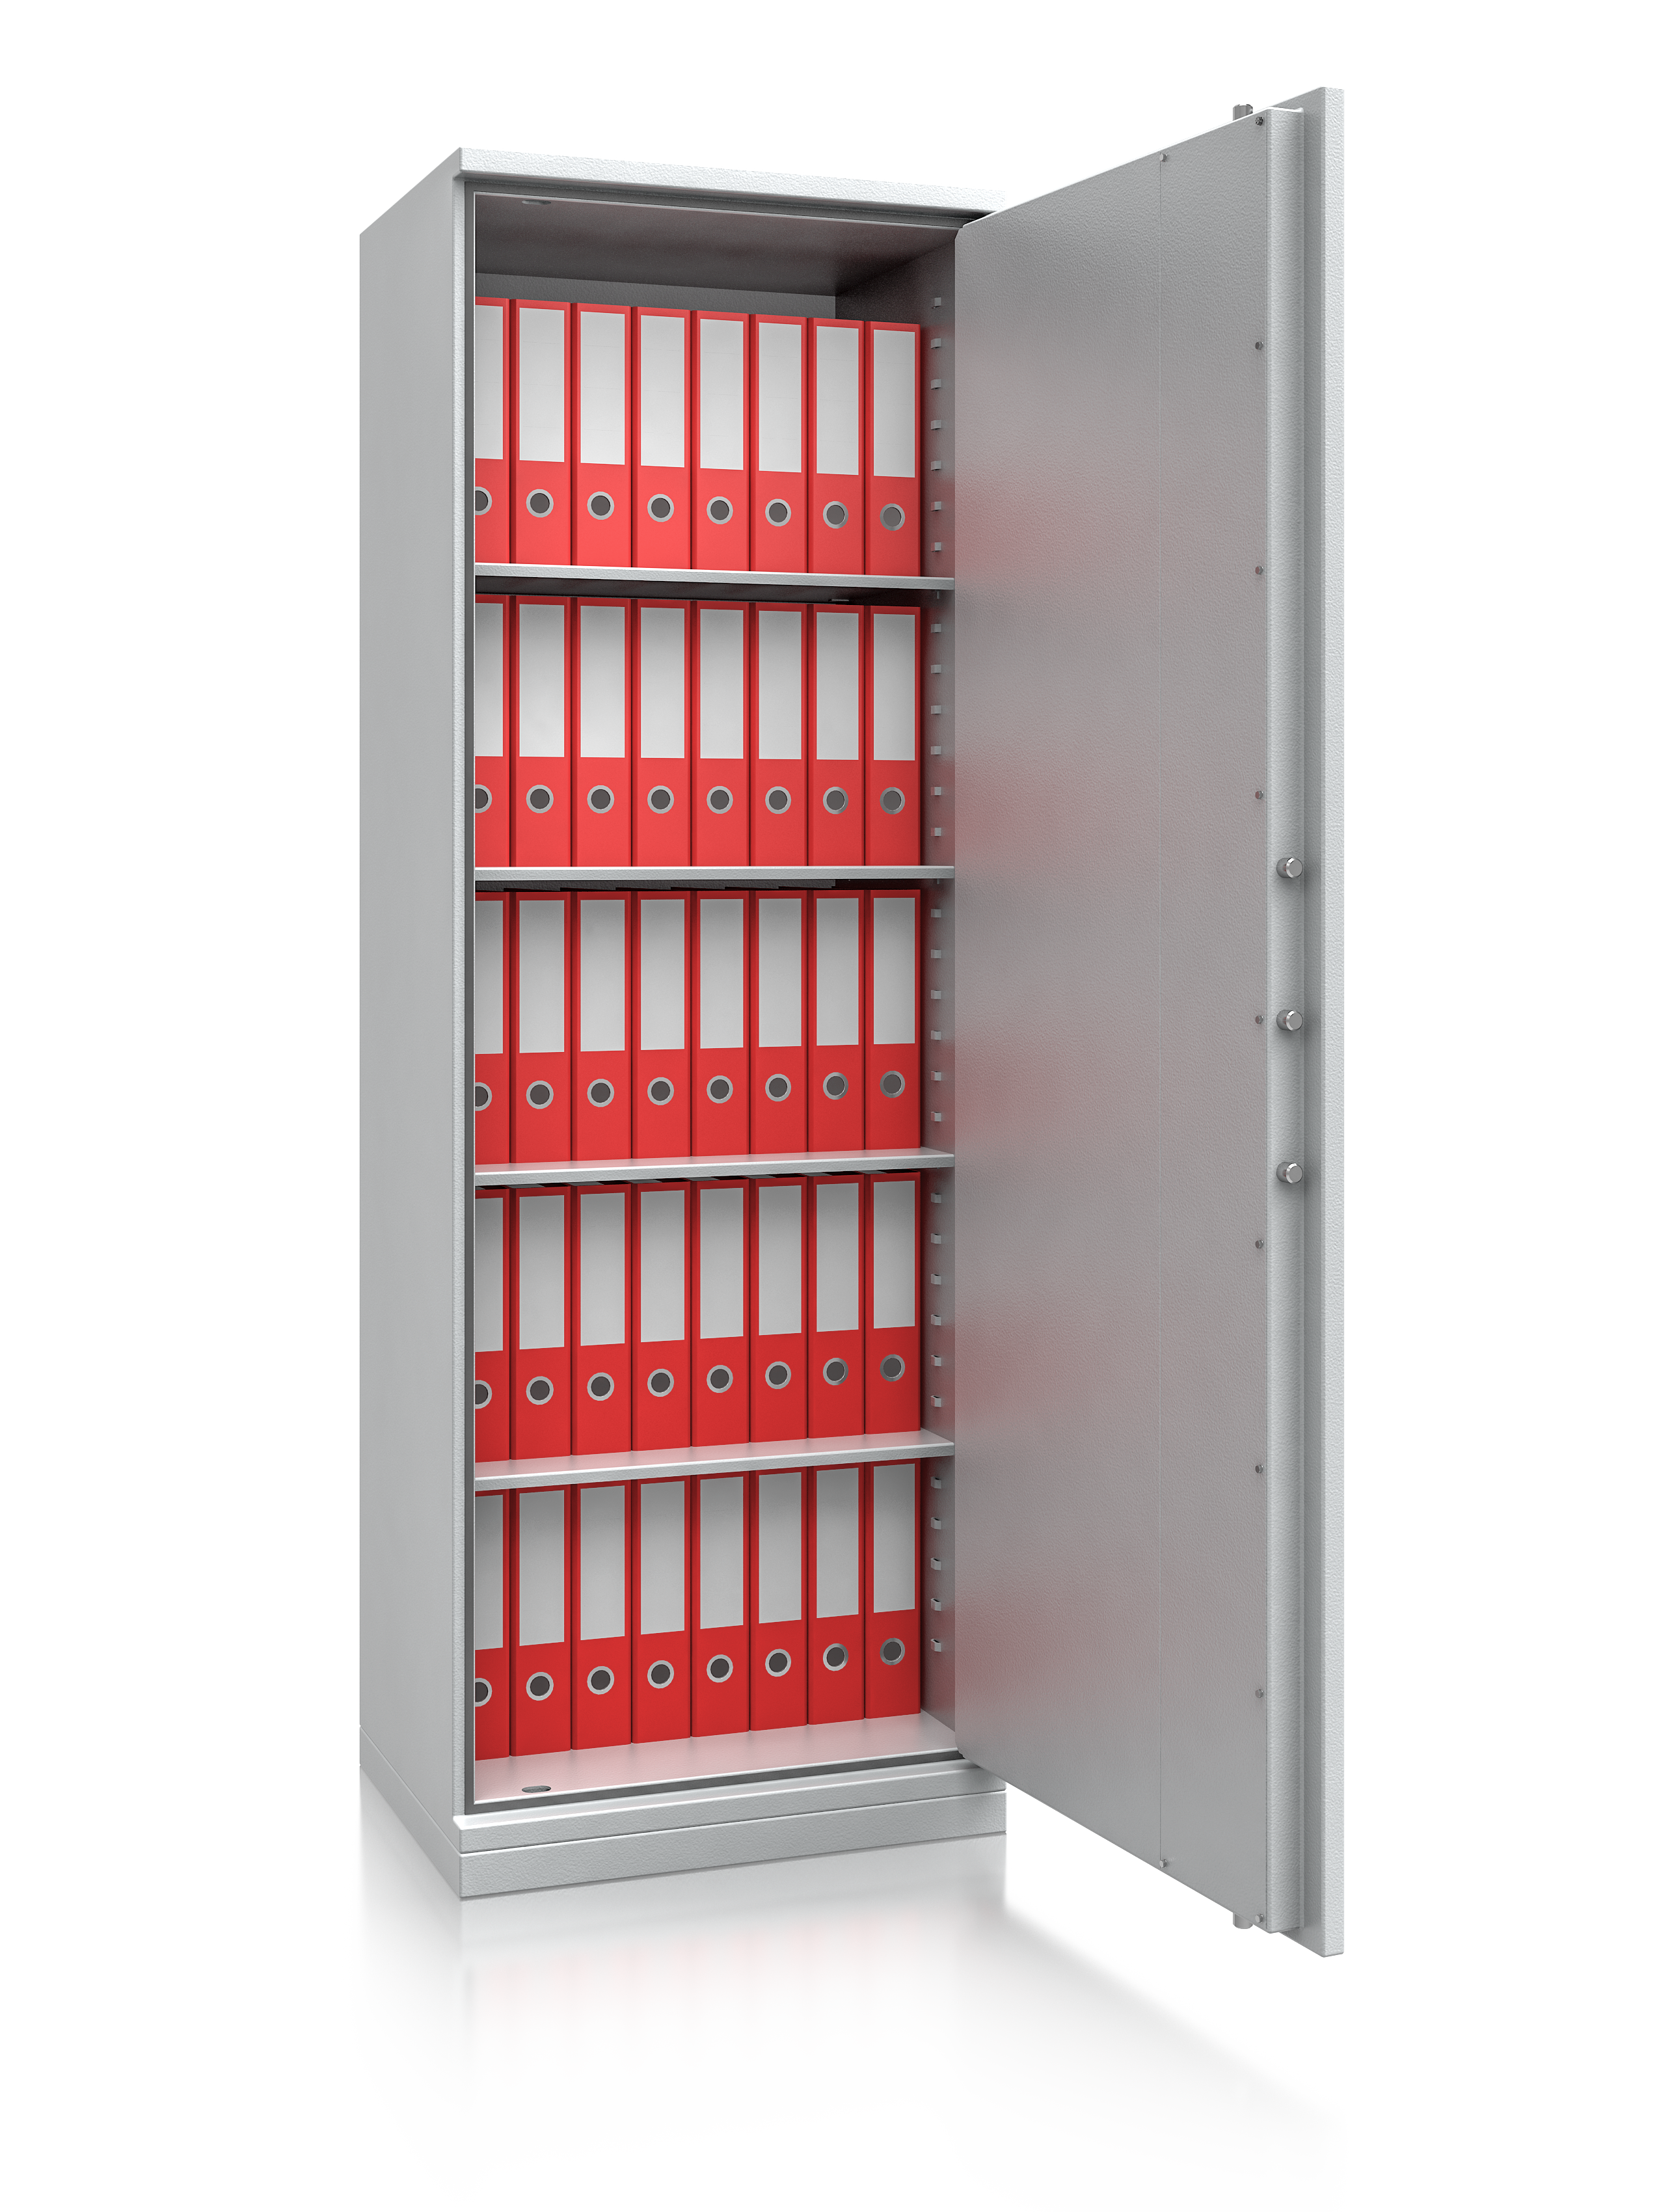 PS-160 fireproof cabinets with 30 minutes fire protection